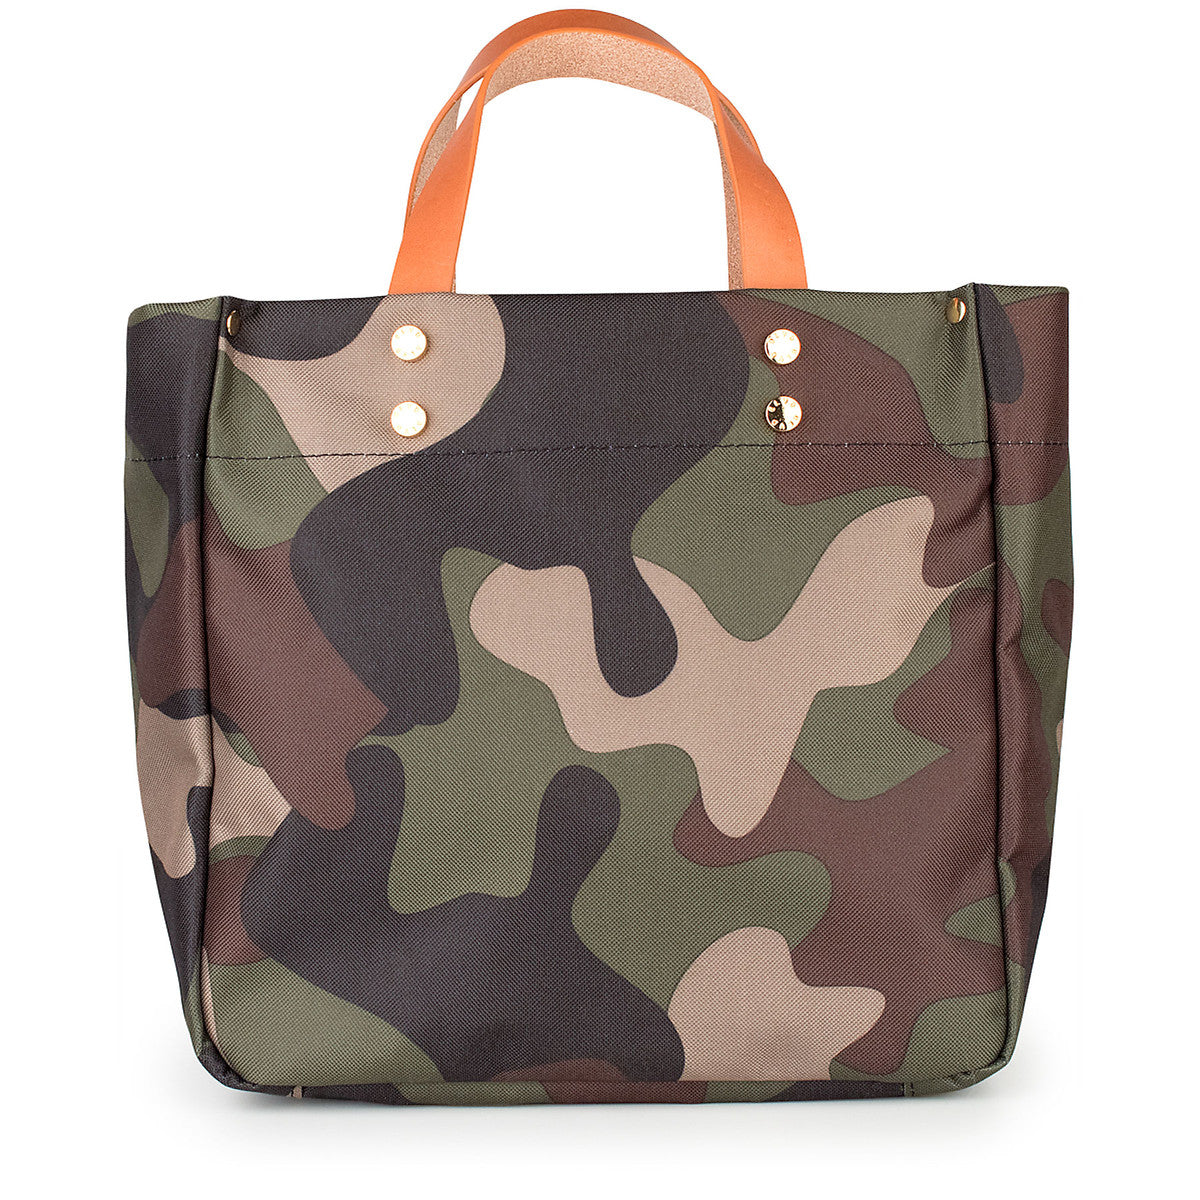 Joey Canvas Tote - Camo (Ships in 1-2 Weeks)